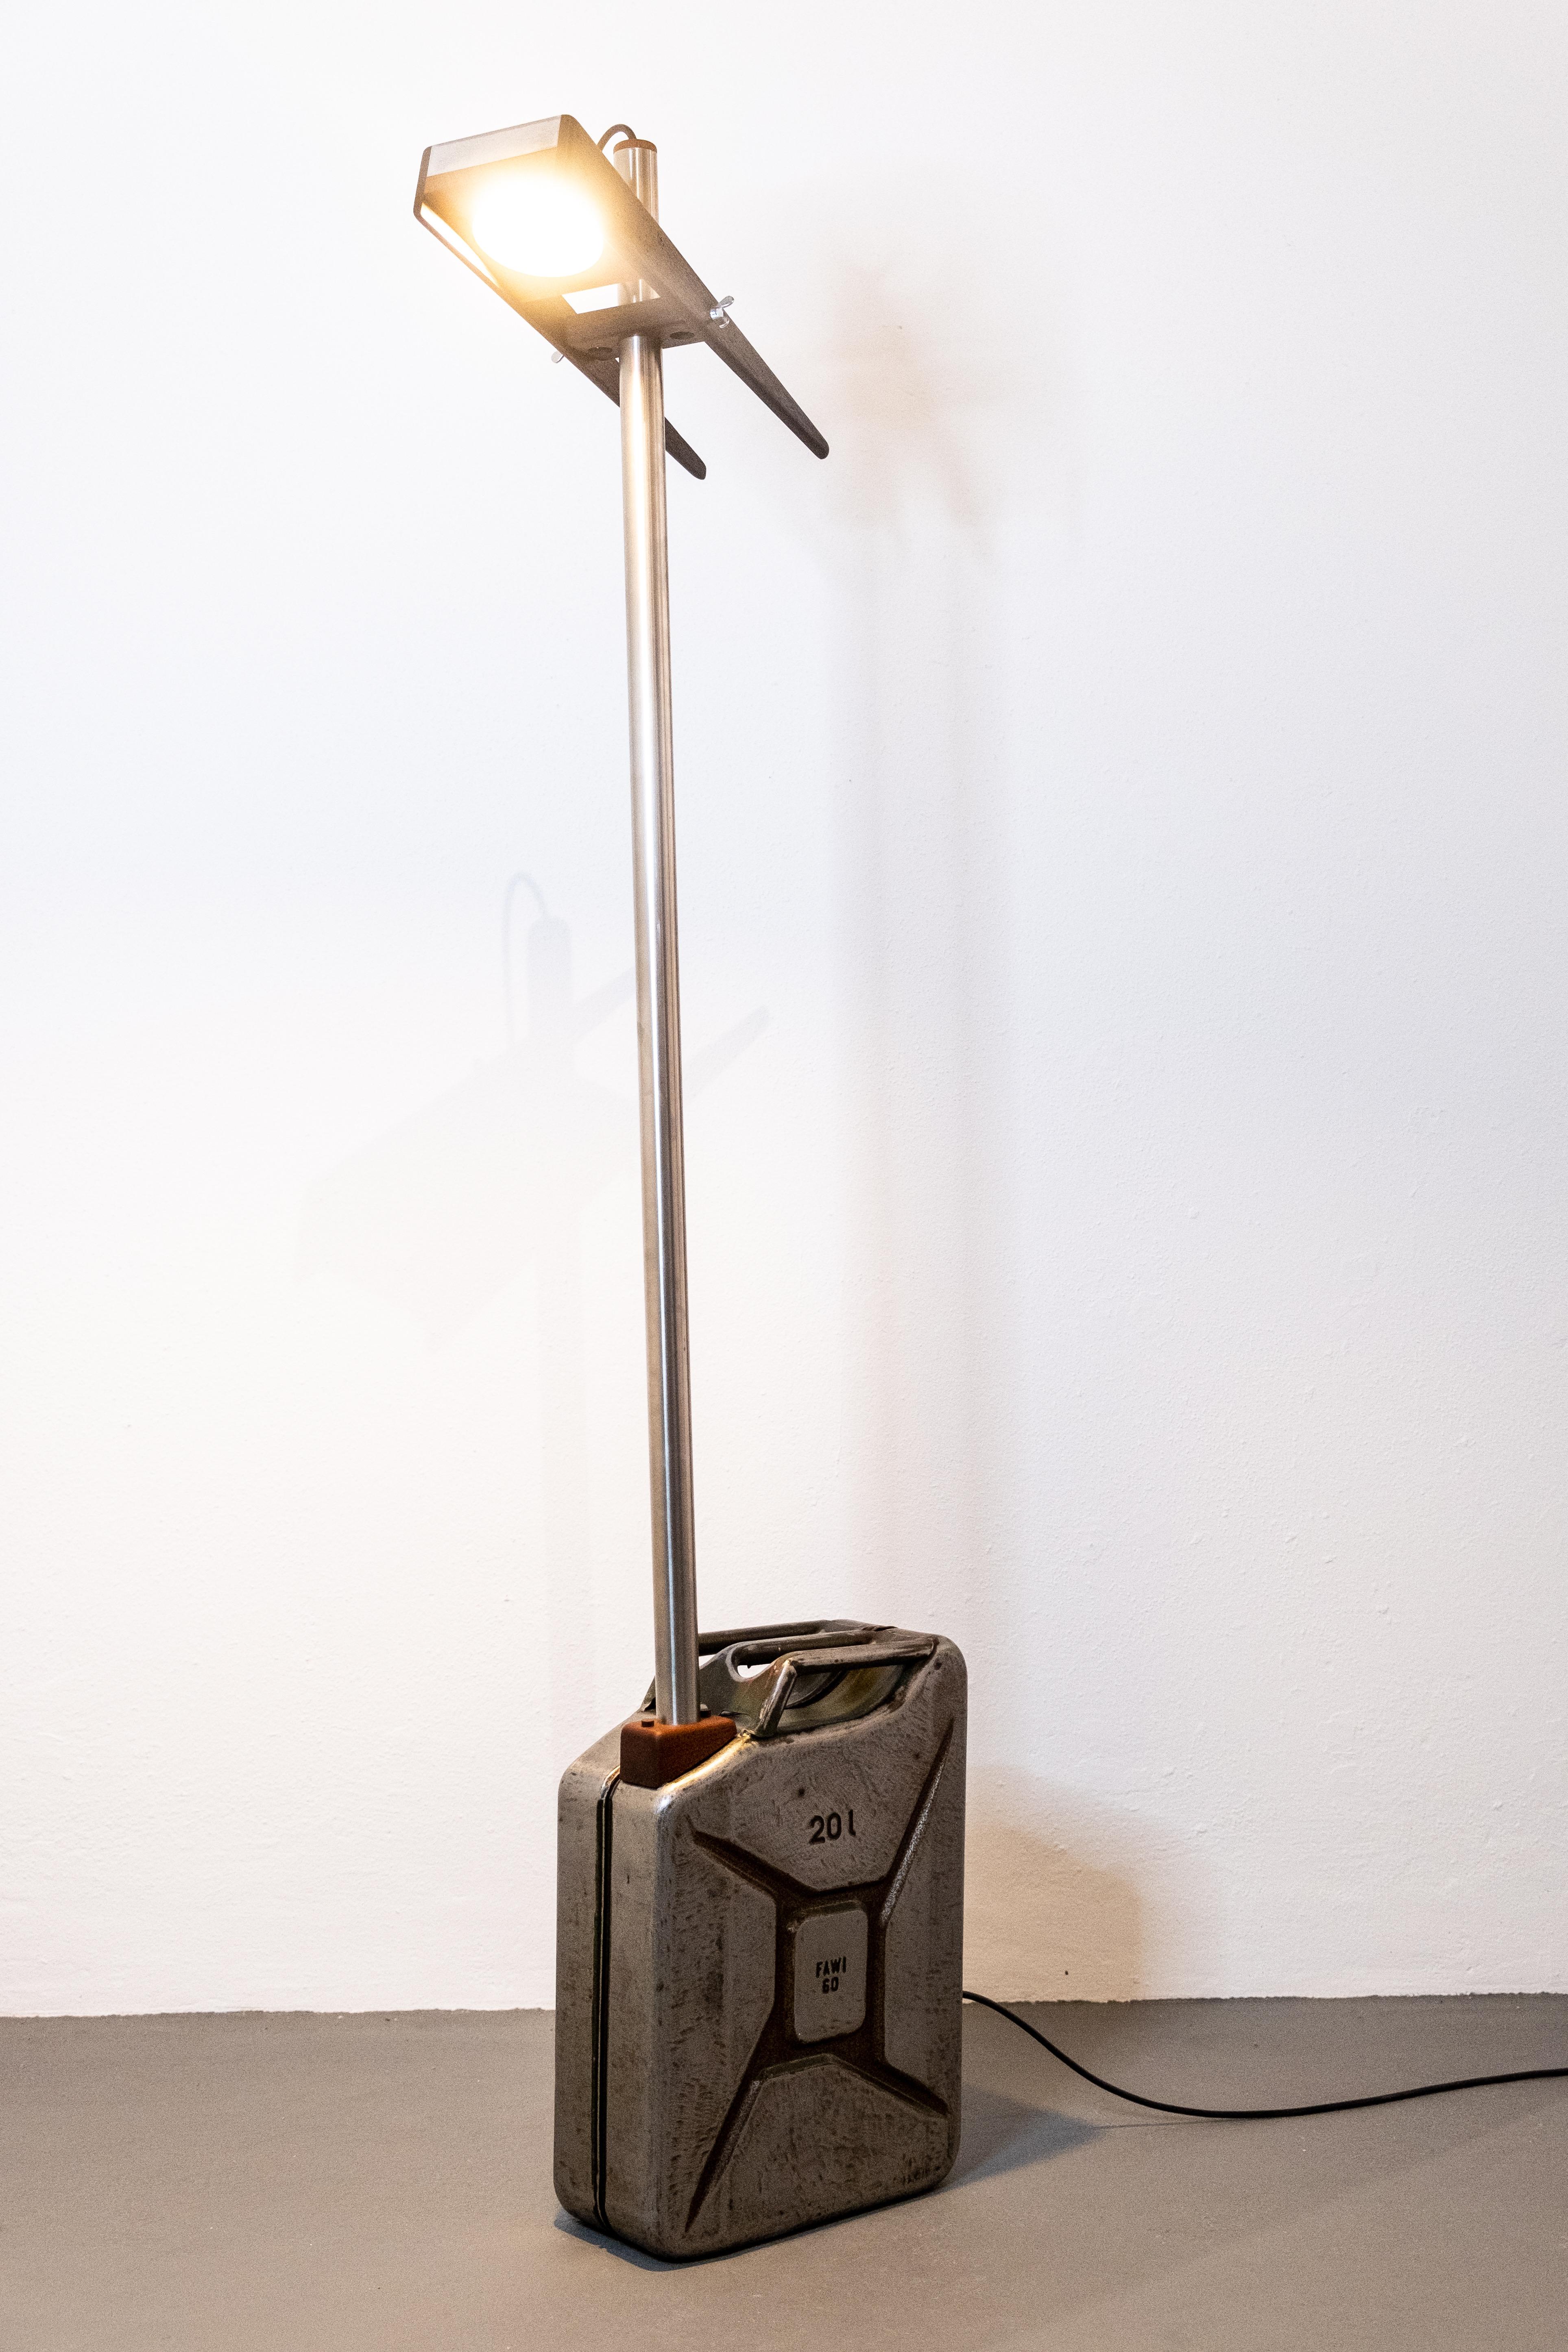 Benzina floor lamp by Caio Superchi
Dimensions: D 48 x W 16 x H 170 cm 
Materials: Wood, Metal
Signed and numbered piece.

All our lamps can be wired according to each country. If sold to the USA it will be wired for the USA for